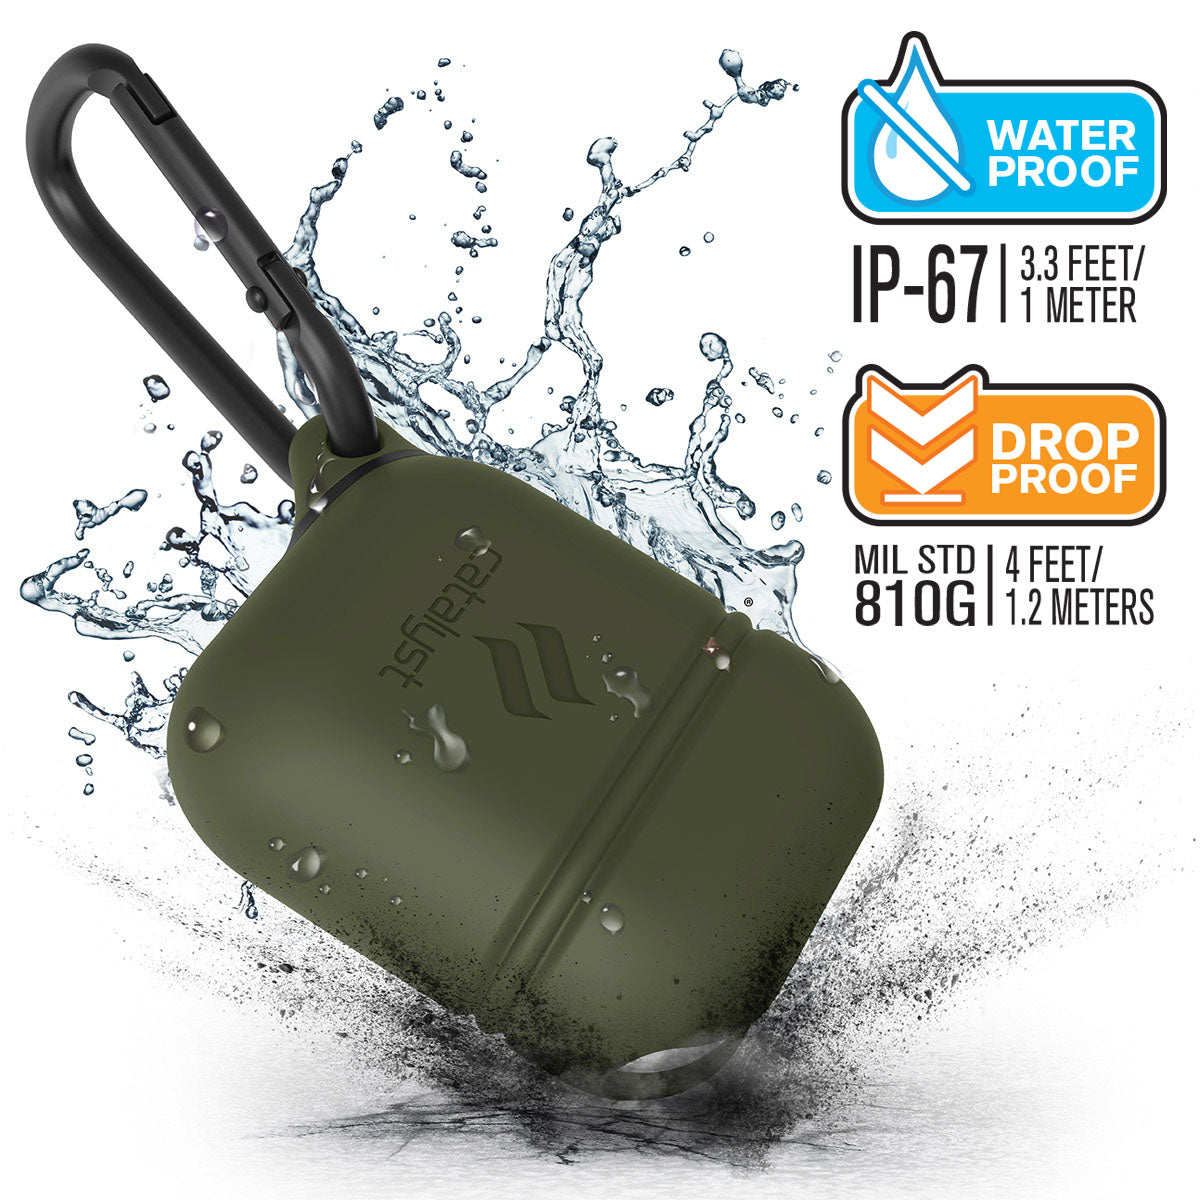 CATAPDGRN-FBA | Catalyst airpods gen2/1 waterproof case + carabiner showing the case drop proof and water proof features with attached carabiner in army green text reads water proof IP-67 3.3 FEET/1 METER DROP PROOF MIL STD 810G 1.2 METERS